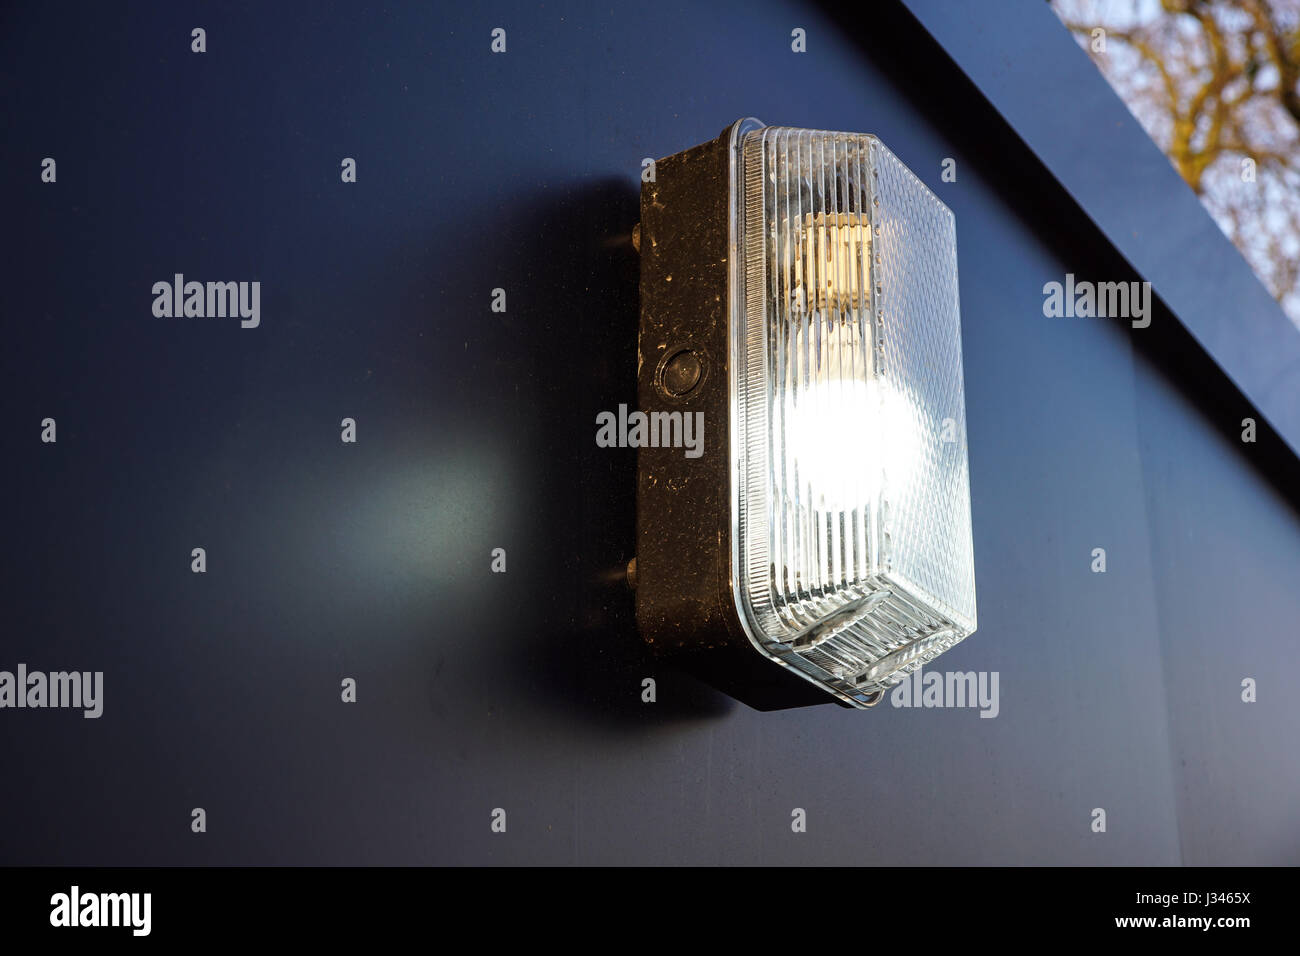 Barricade and Warning Light Closeup . traffic safety roadwork signs and light Stock Photo